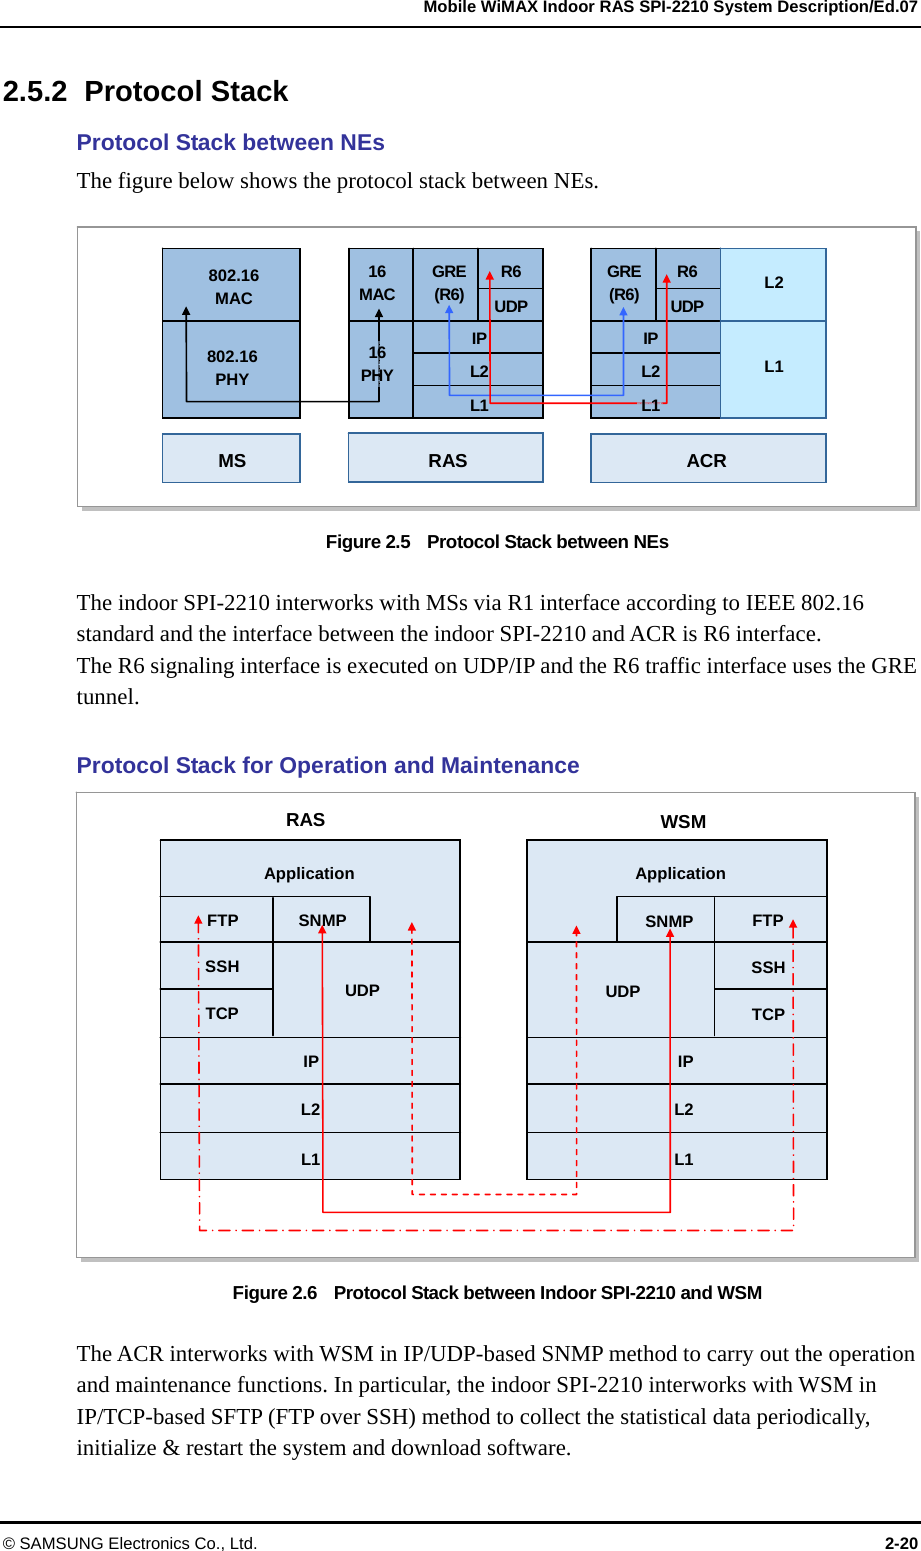   Mobile WiMAX Indoor RAS SPI-2210 System Description/Ed.07 © SAMSUNG Electronics Co., Ltd.  2-20 2.5.2 Protocol Stack Protocol Stack between NEs The figure below shows the protocol stack between NEs.  Figure 2.5    Protocol Stack between NEs  The indoor SPI-2210 interworks with MSs via R1 interface according to IEEE 802.16 standard and the interface between the indoor SPI-2210 and ACR is R6 interface. The R6 signaling interface is executed on UDP/IP and the R6 traffic interface uses the GRE tunnel.  Protocol Stack for Operation and Maintenance Figure 2.6    Protocol Stack between Indoor SPI-2210 and WSM  The ACR interworks with WSM in IP/UDP-based SNMP method to carry out the operation and maintenance functions. In particular, the indoor SPI-2210 interworks with WSM in IP/TCP-based SFTP (FTP over SSH) method to collect the statistical data periodically, initialize &amp; restart the system and download software. 16PHY802.16  MAC 802.16  PHY 16 MACGRE(R6) R6UDPIPL2L1MS RASACRGRE(R6) R6UDPL2 L1 IPL2L116 PHY WSMRAS IPApplication FTPTCPSSHFTP TCP SSHL2 IP ApplicationSNMP UDP UDPSNMPL1 L2 L1 